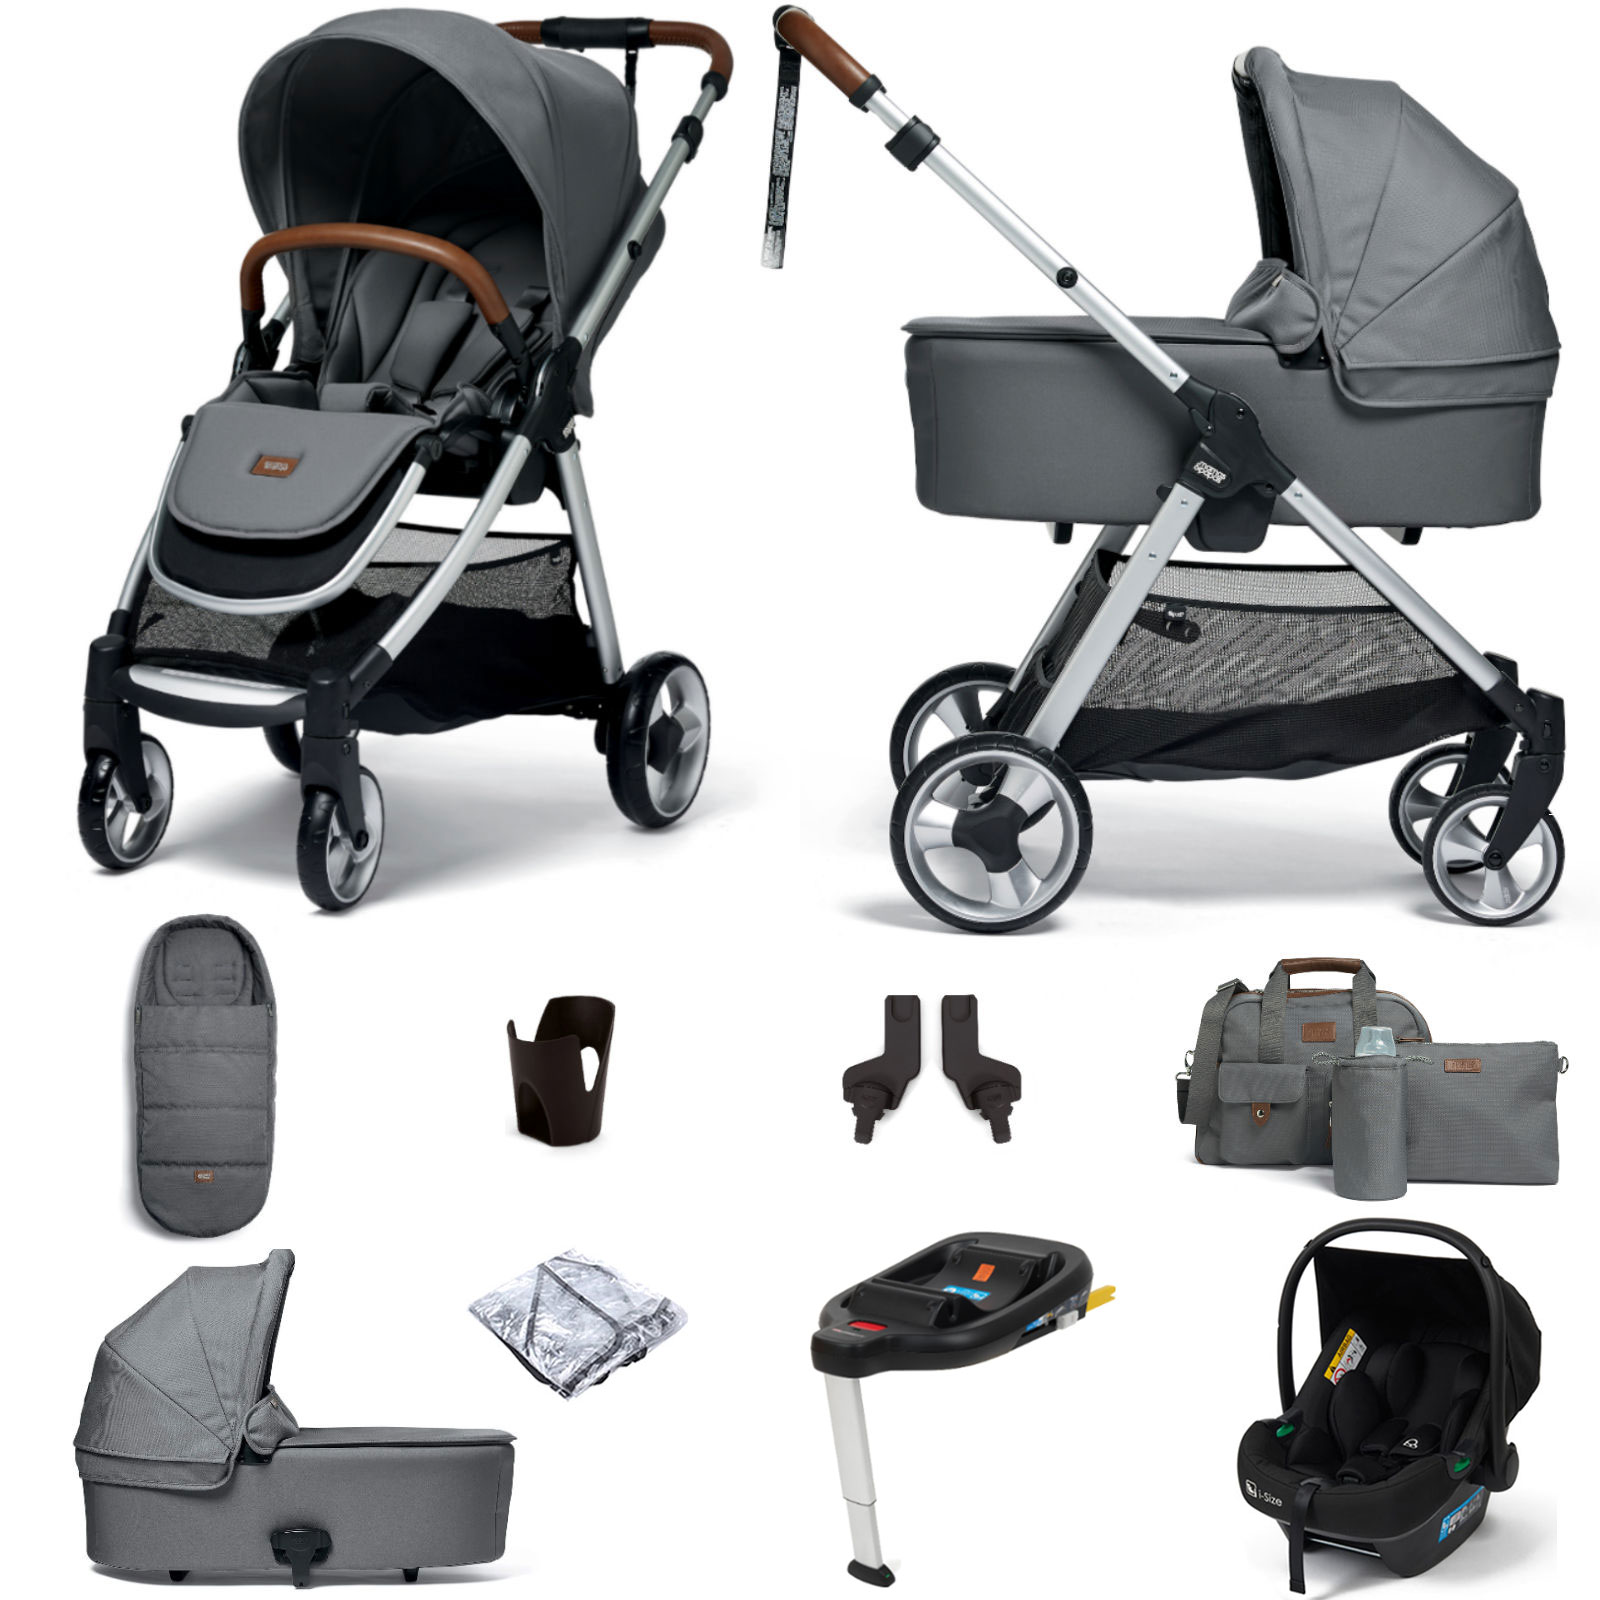 Mamas & Papas Flip XT2 Essentials (Safe Fit i-Size Infant Car Seat & ISOFIX Base) Travel System with Carrycot - Fossil Grey